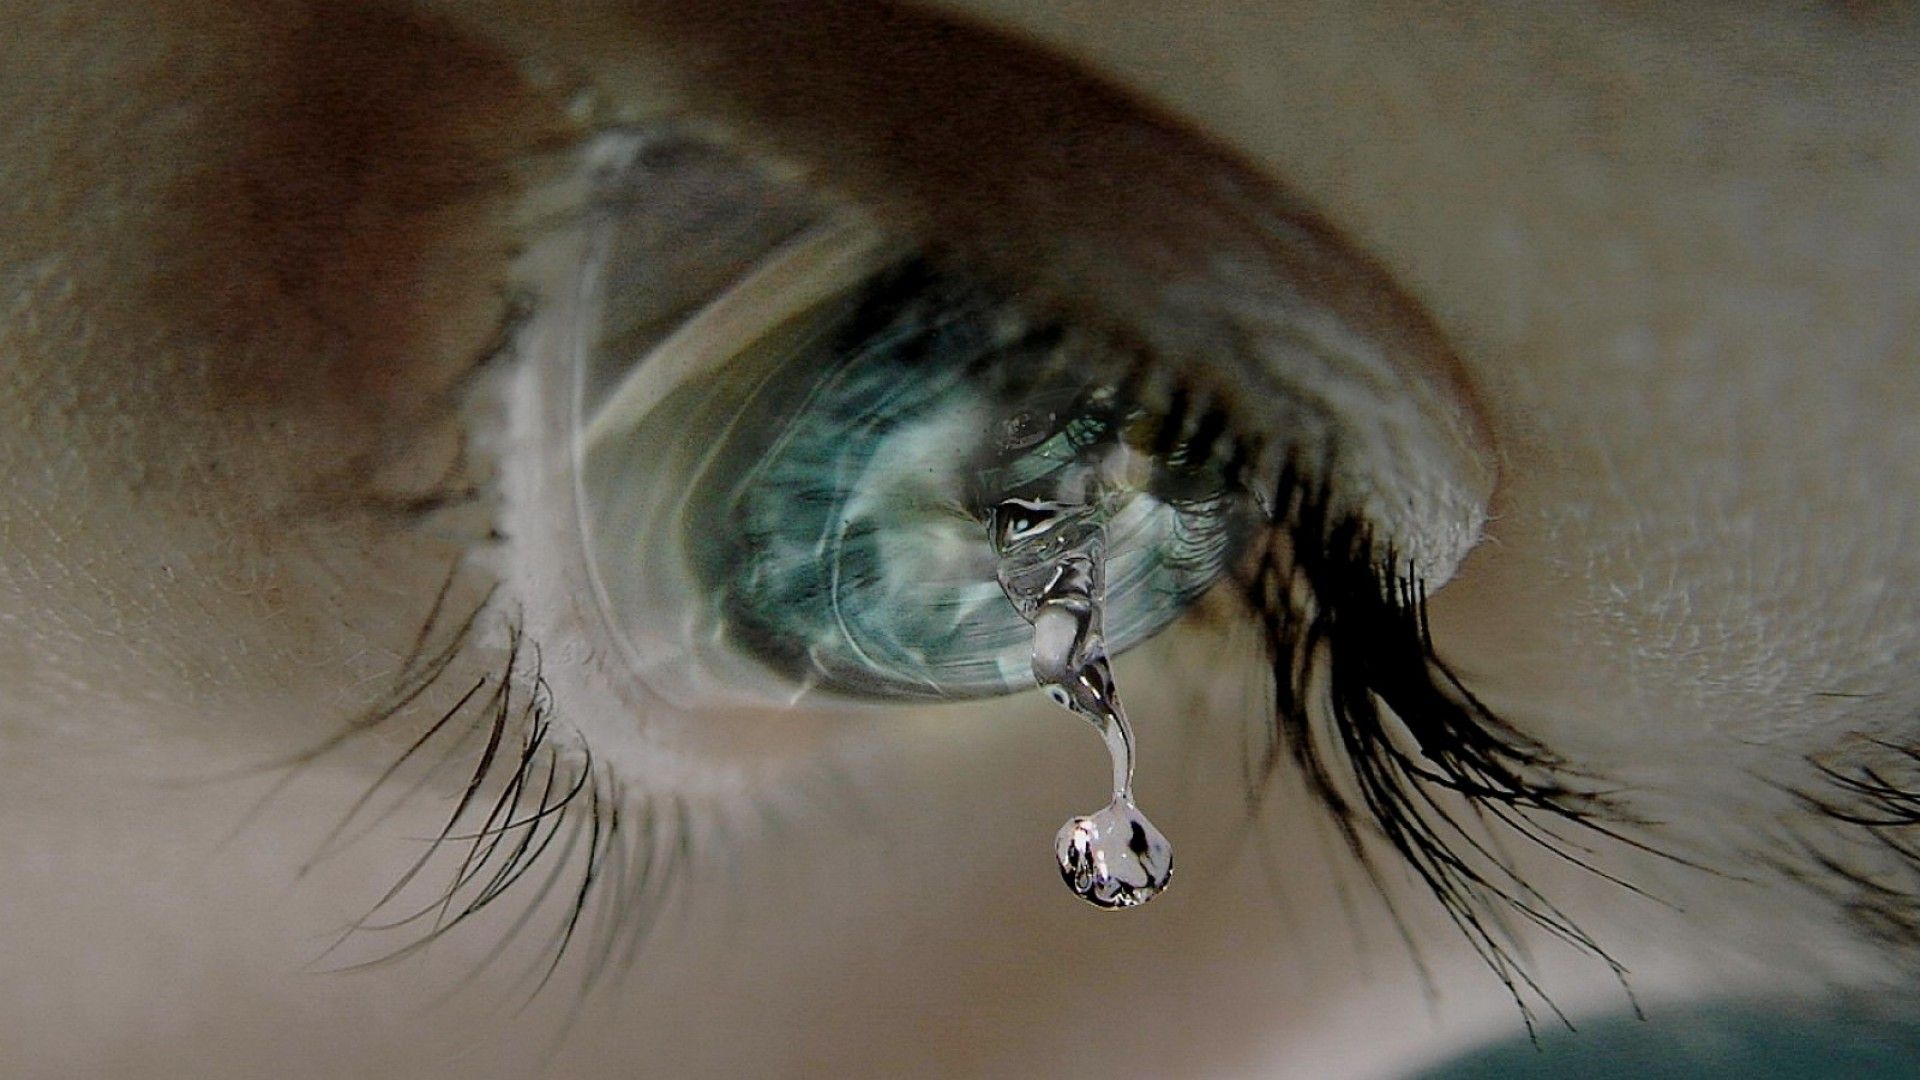 Most Beautiful Eyes With Tears Wallpaper Cry Me A River